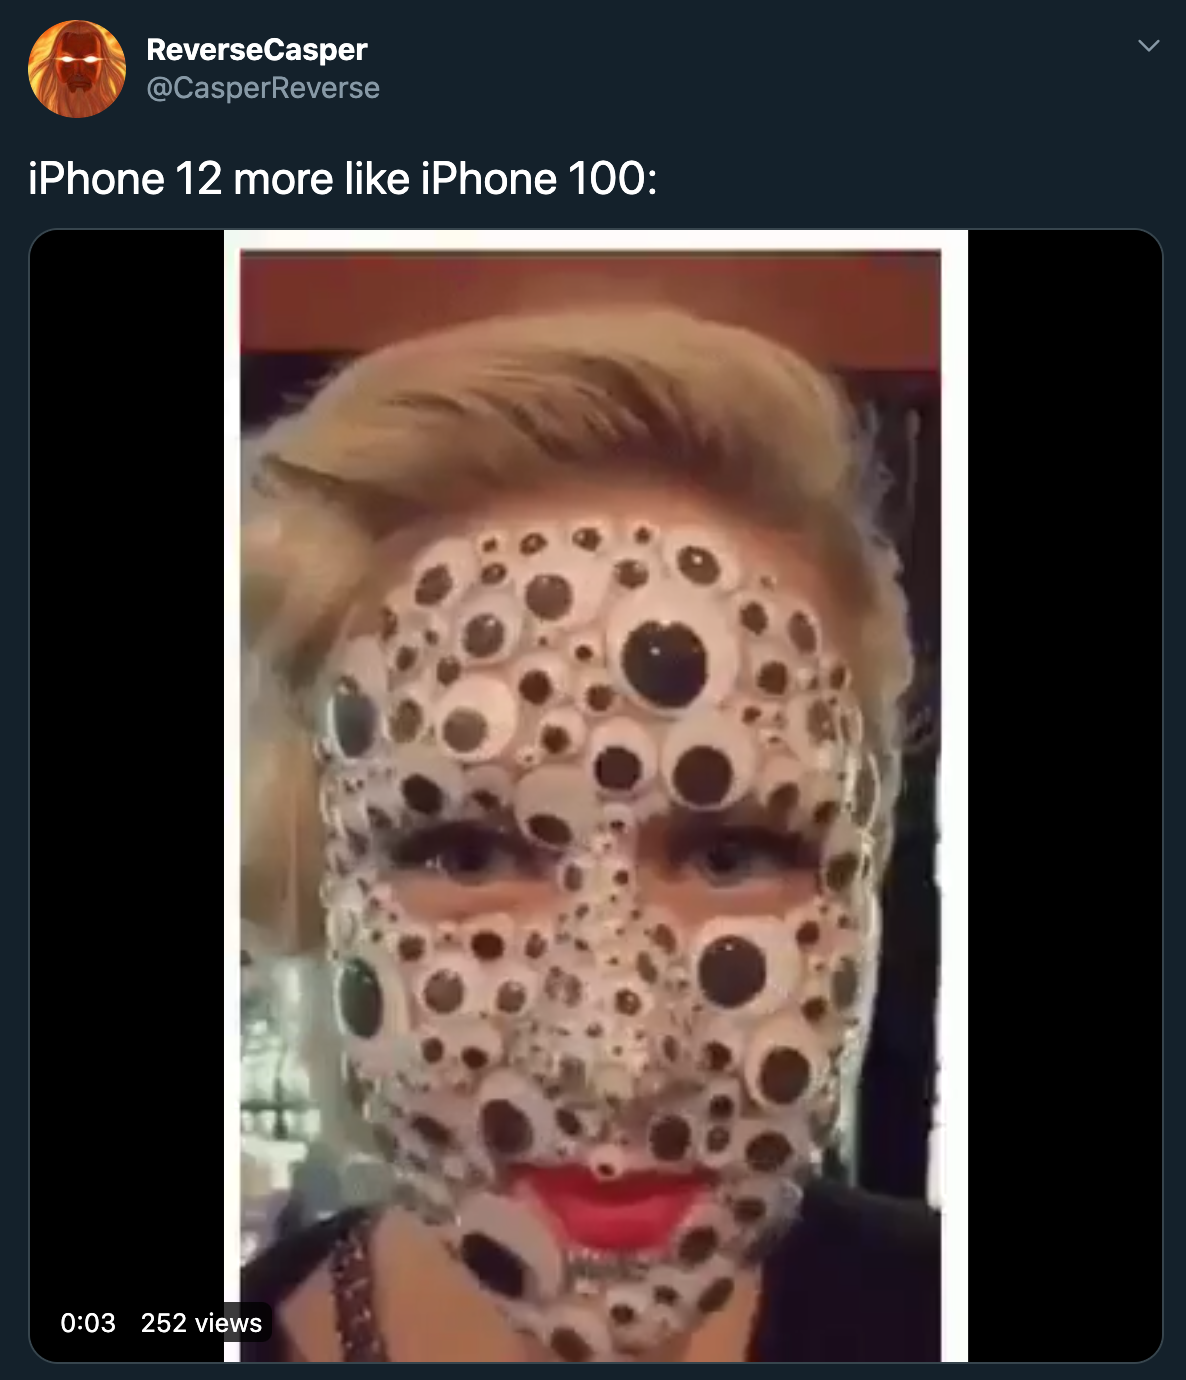 iPhone 12 more iPhone 100 - woman's face covered in googly eyes